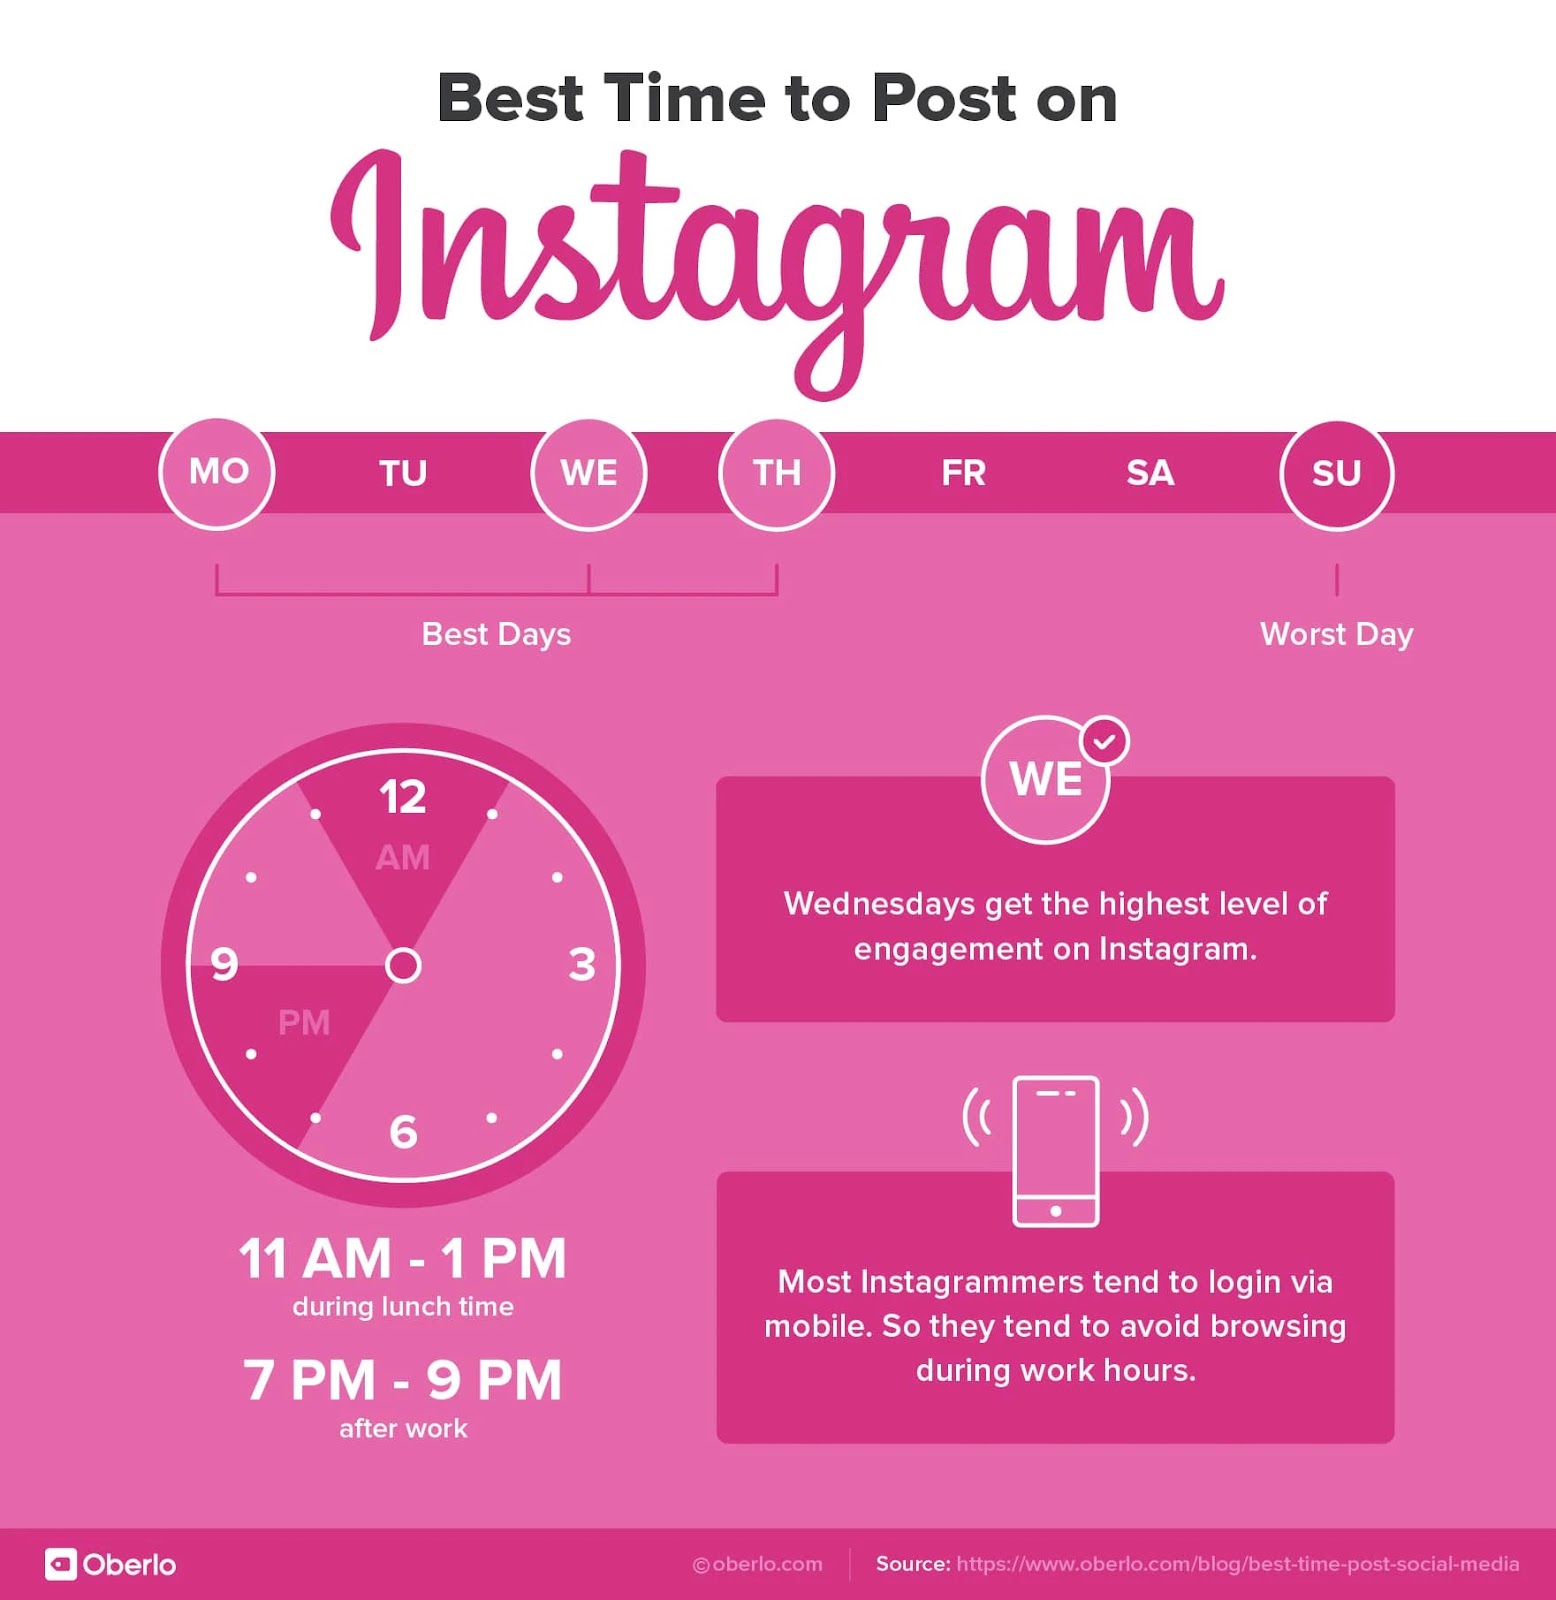 When Is The Best Time to Post on Social Media